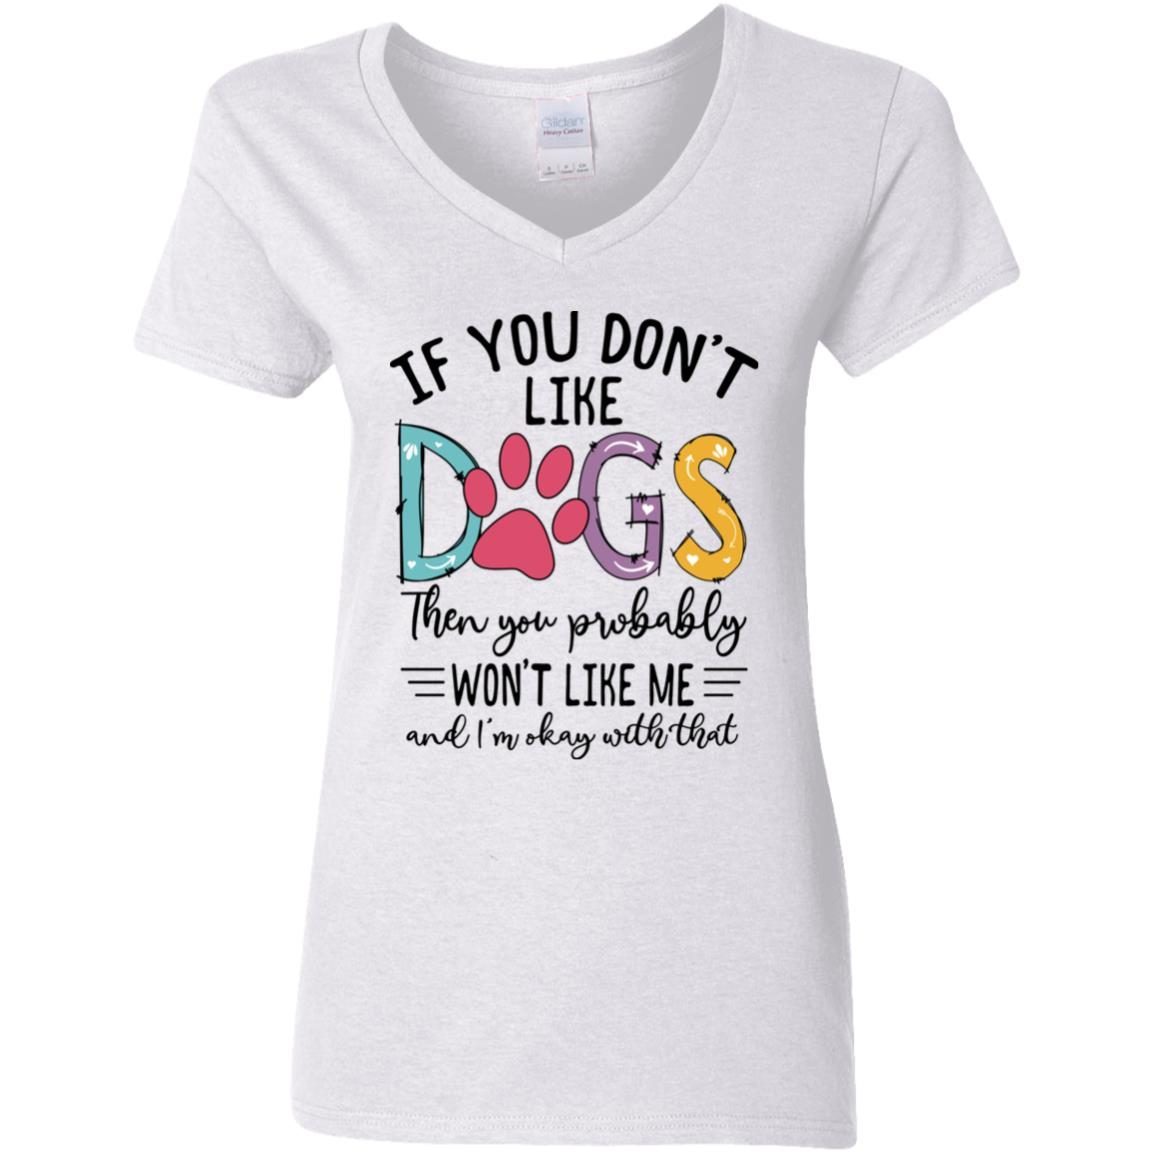 If You Don’t Like Dogs Then You Probably Won’t Like Me shirt 7